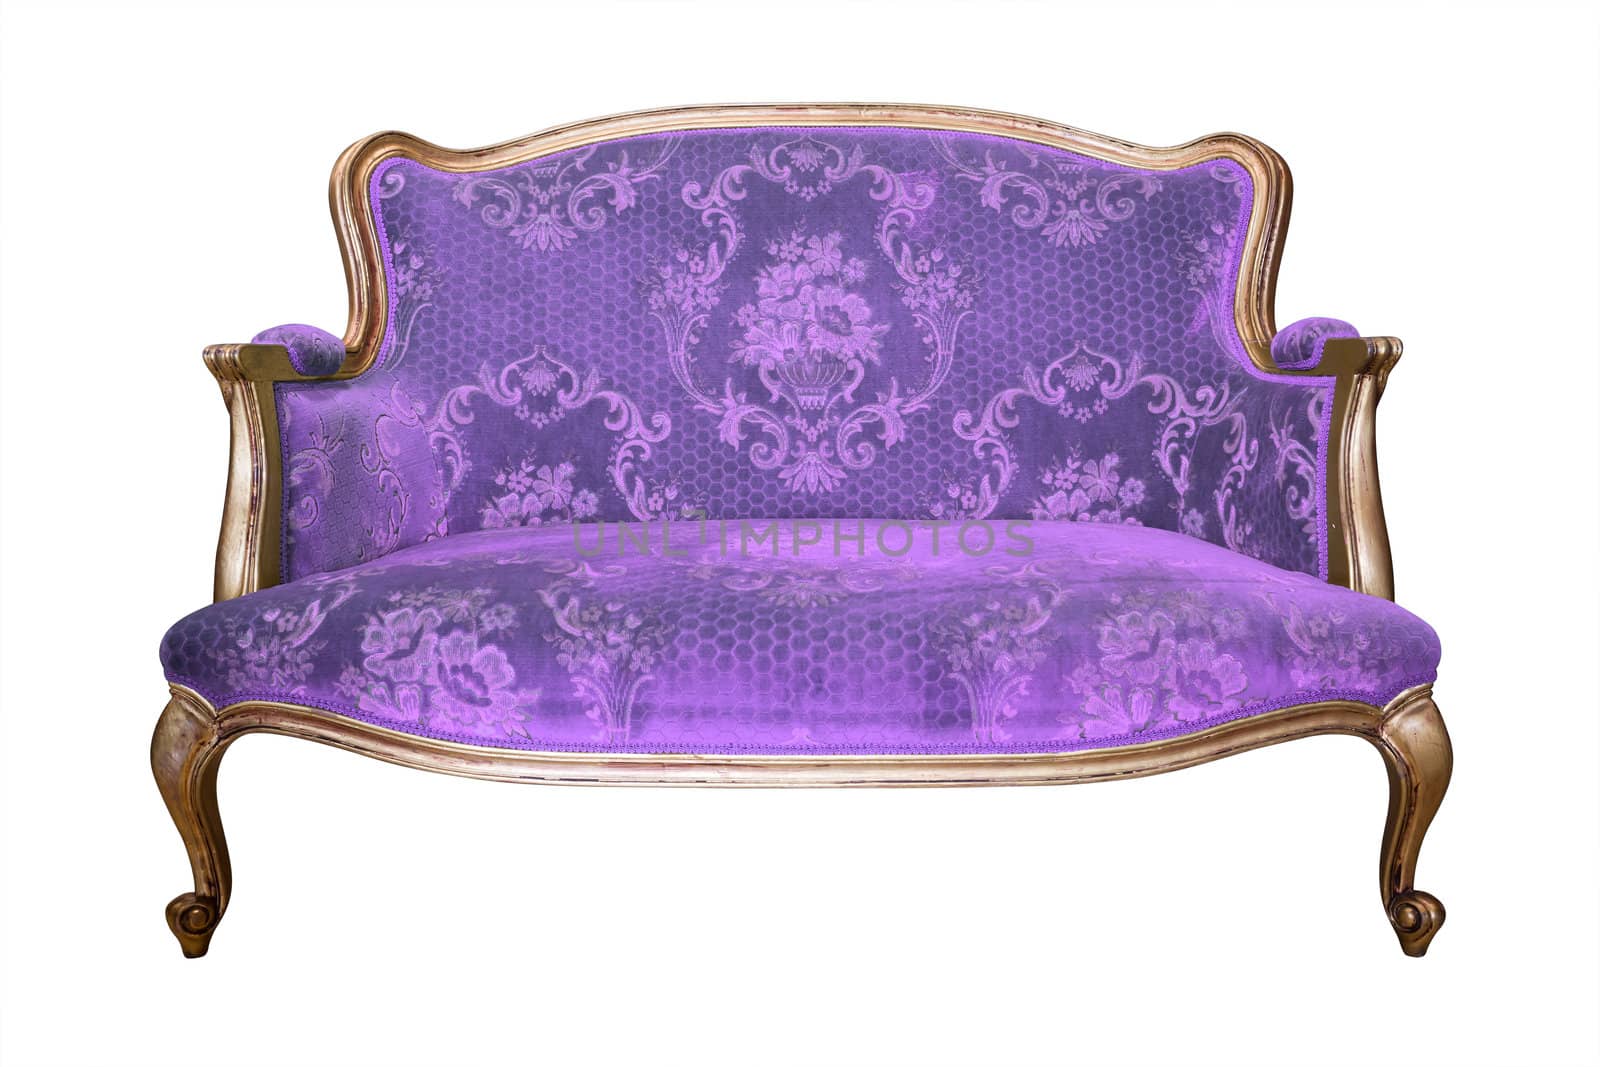 vintage purple luxury armchair isolated with clipping path by tungphoto